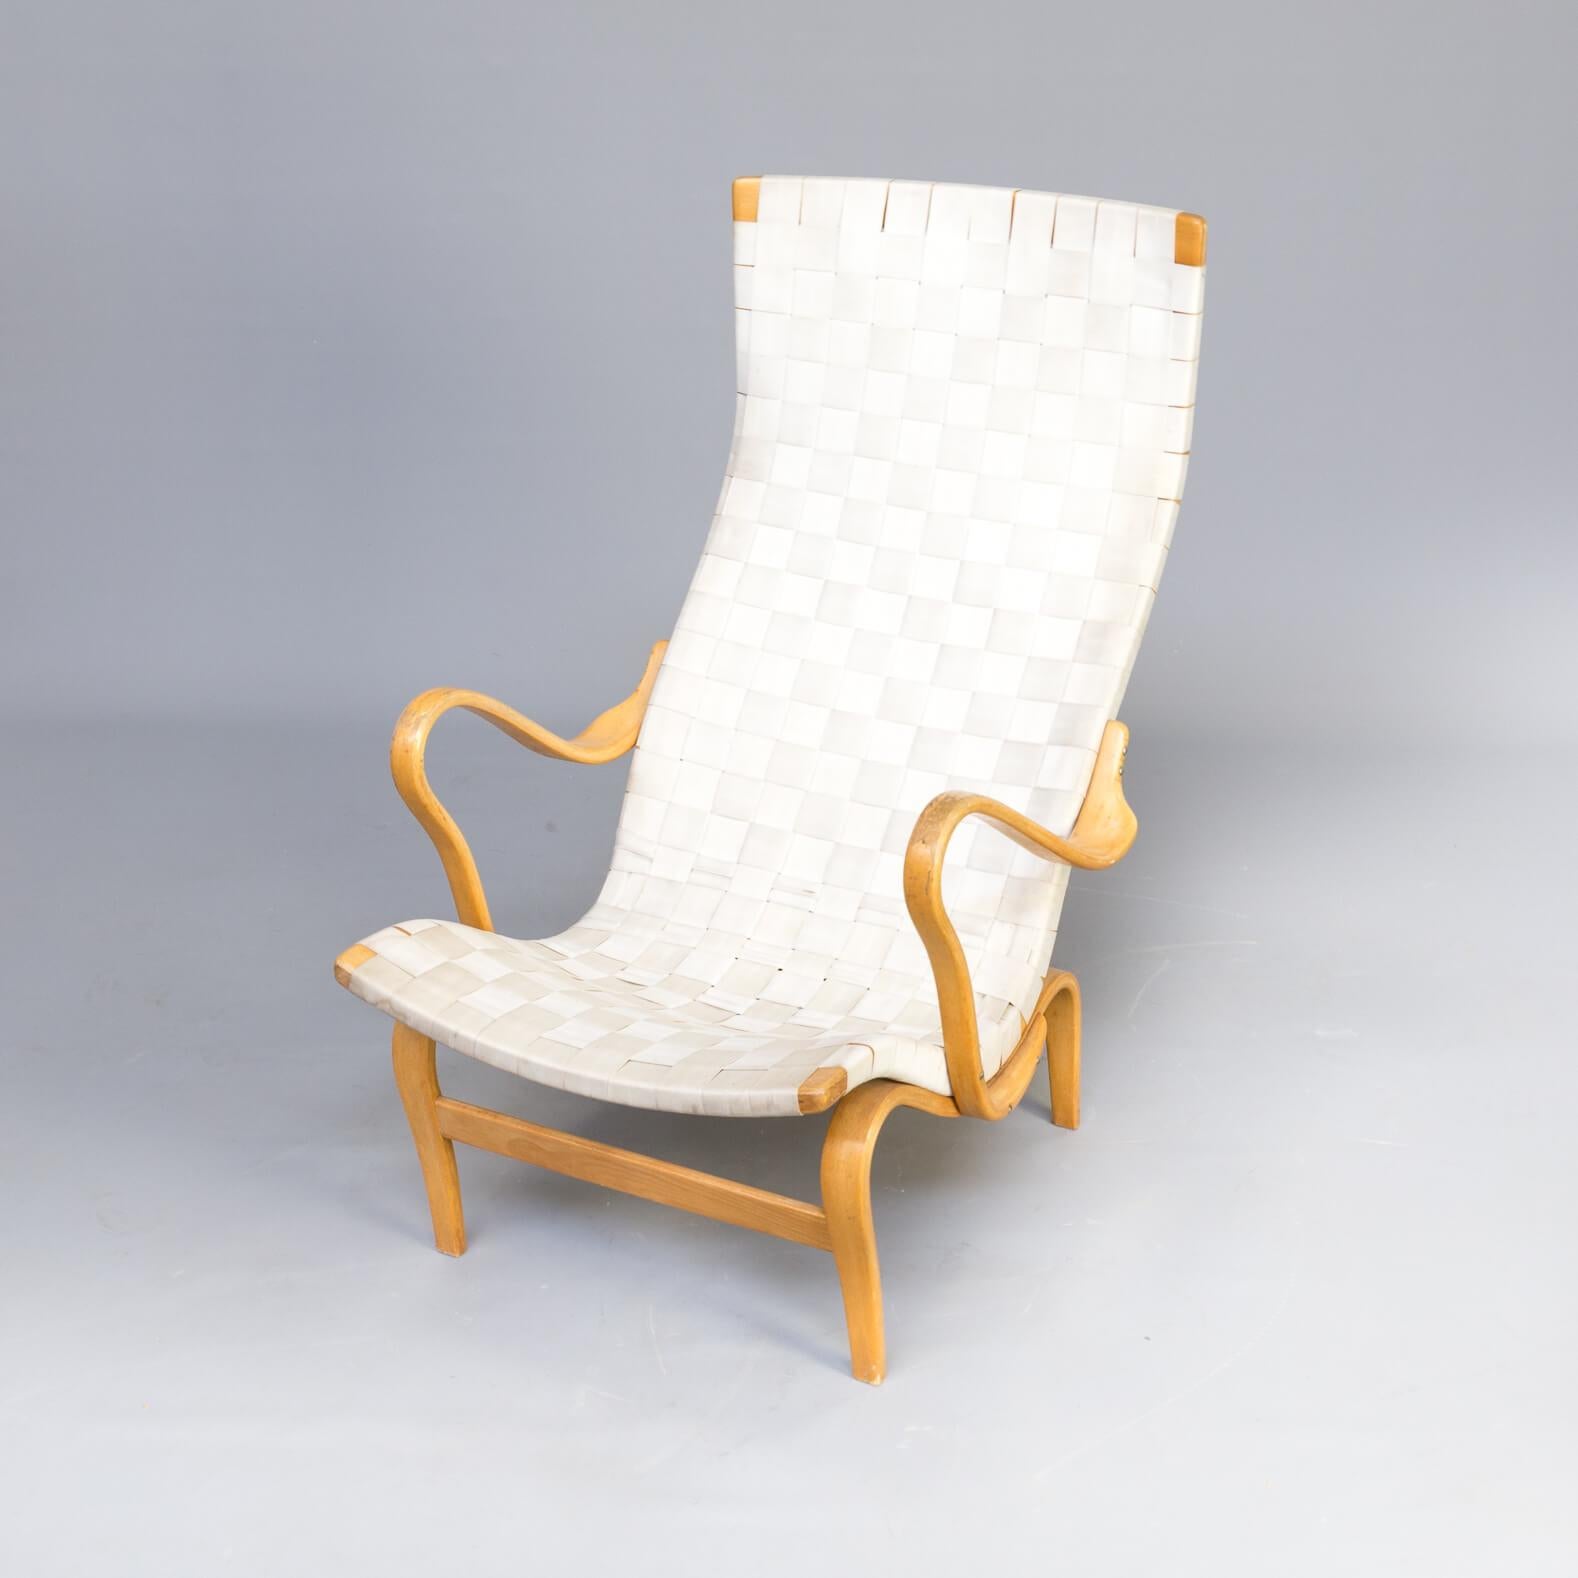 1970s Bruno Mathsson ‘Pernilla’ Chairs for Karl Mathsson Set of 2 For Sale 1